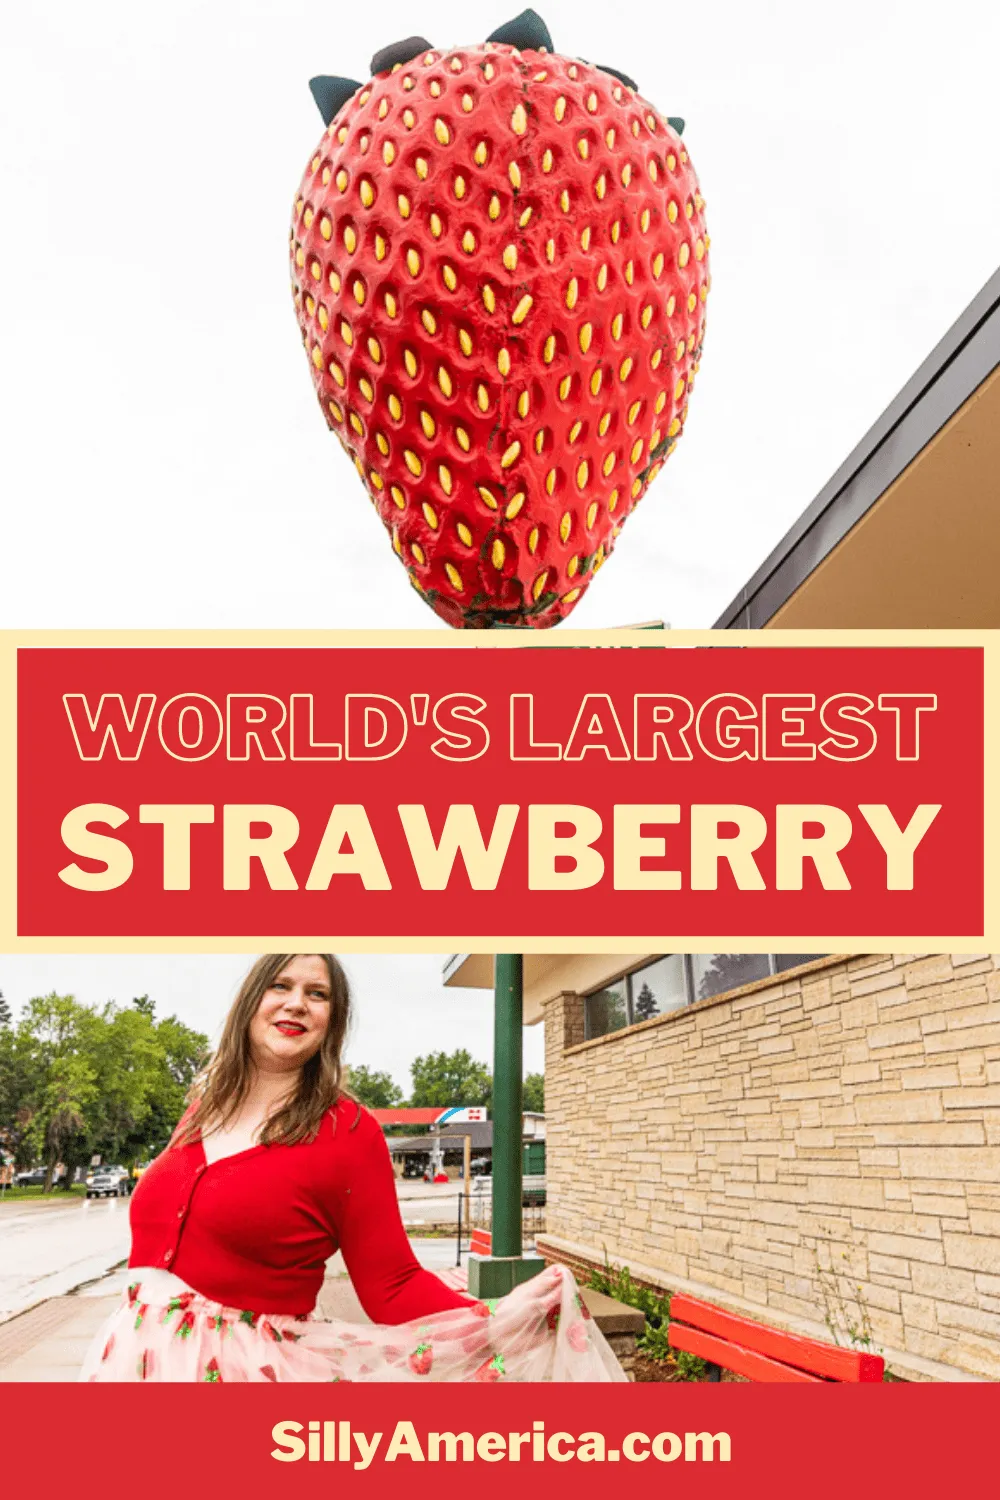 I love this Iowa roadside attraction BERRY much — and I hope you do too. It’s the world’s largest strawberry in Strawberry Point, Iowa. Stop at this giant berry on an Iowa road trip. It's a road trip stop you can't miss!   #IowaRoadsideAttractions #IowaRoadsideAttraction #RoadsideAttractions #RoadsideAttraction #RoadTrip #IowaRoadTrip #IowaThingsToDo #IowaRoadTripBucketLists #IowaBucketList #IowaRoadTripIdeas #IowaWaterfallsRoadTrip #IowaTravel #strawberry